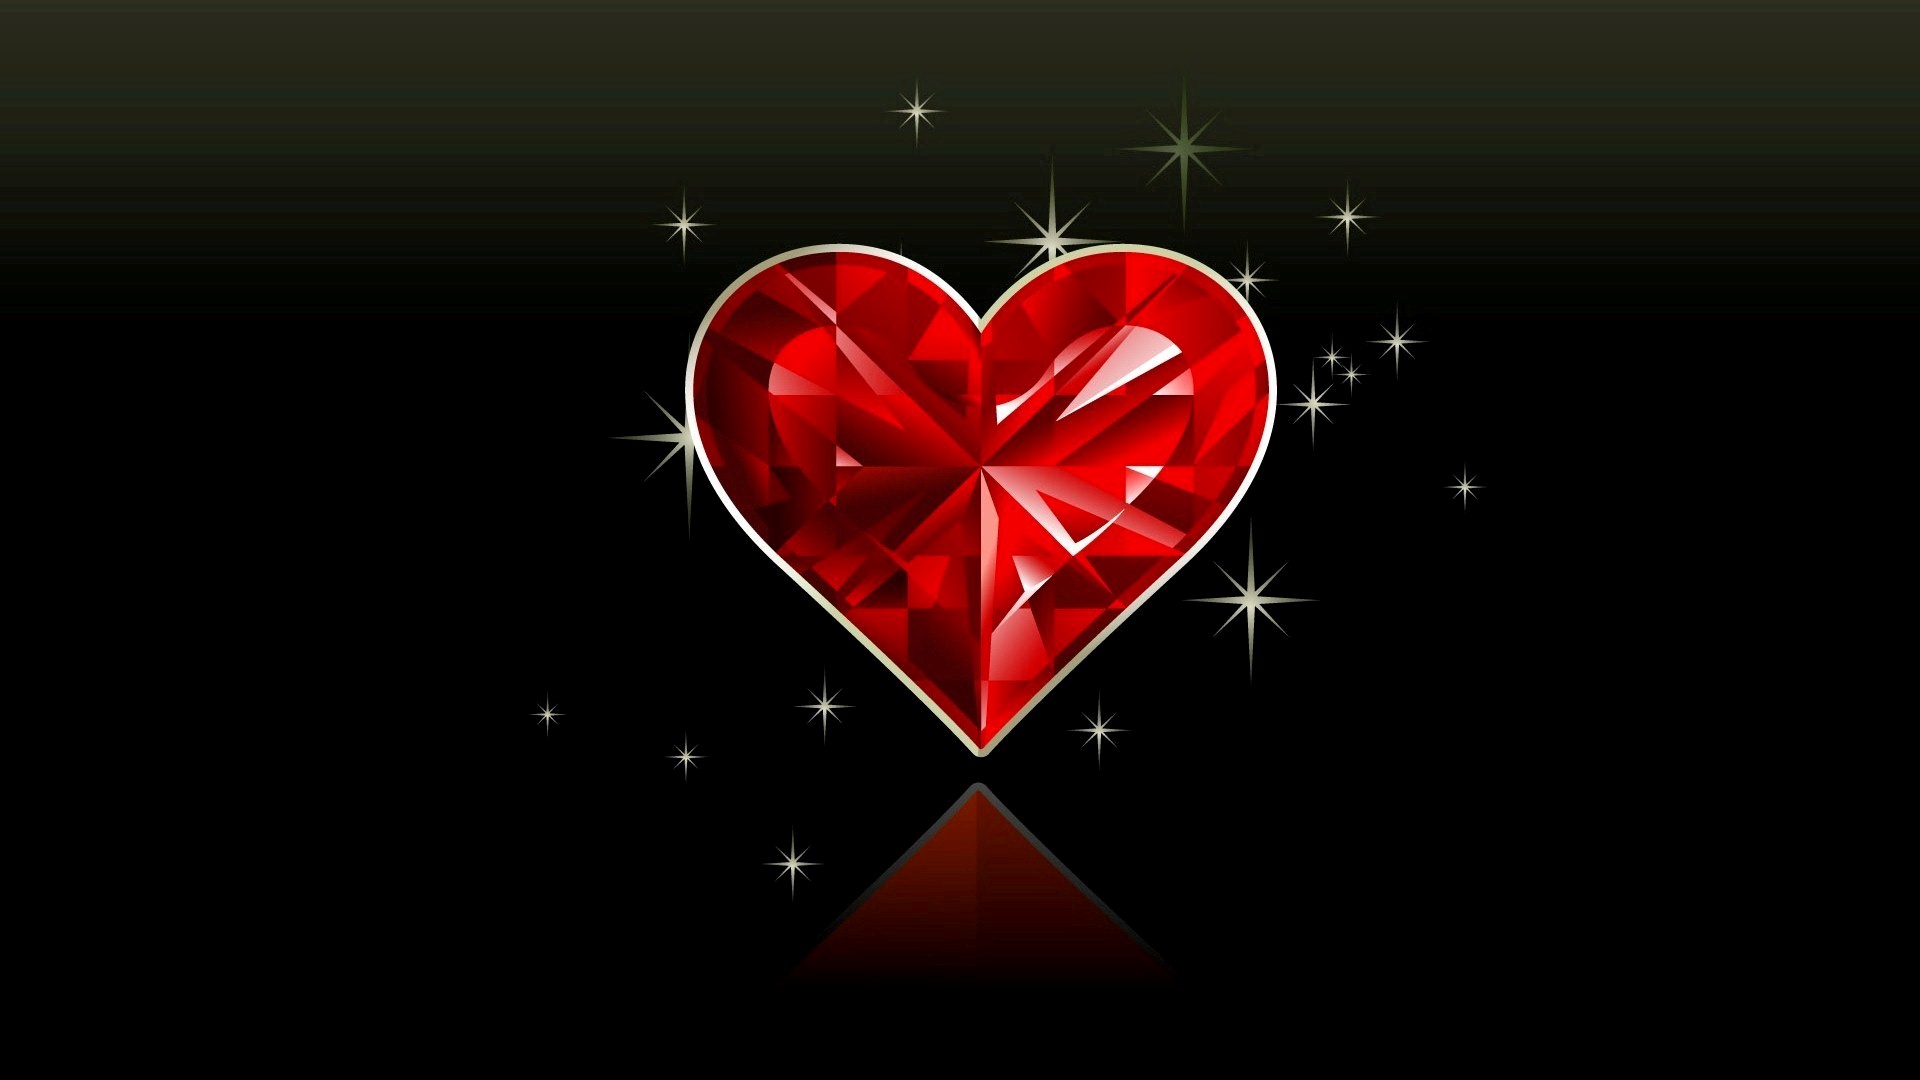 Red Crystal Heart in Black Background HD Wallpapers